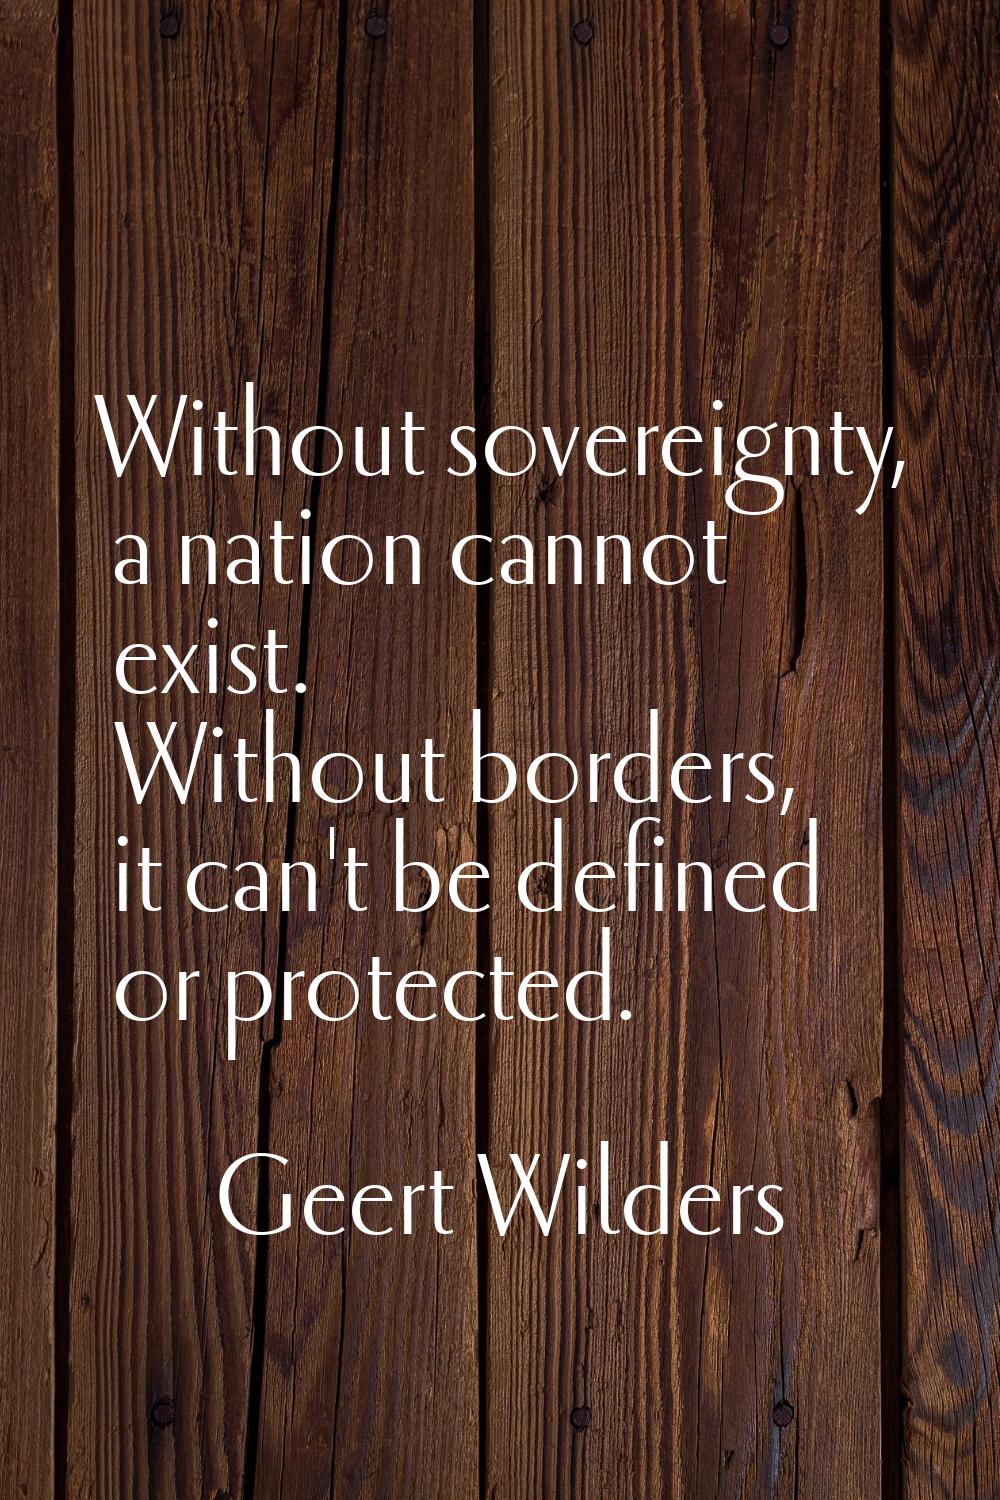 Without sovereignty, a nation cannot exist. Without borders, it can't be defined or protected.